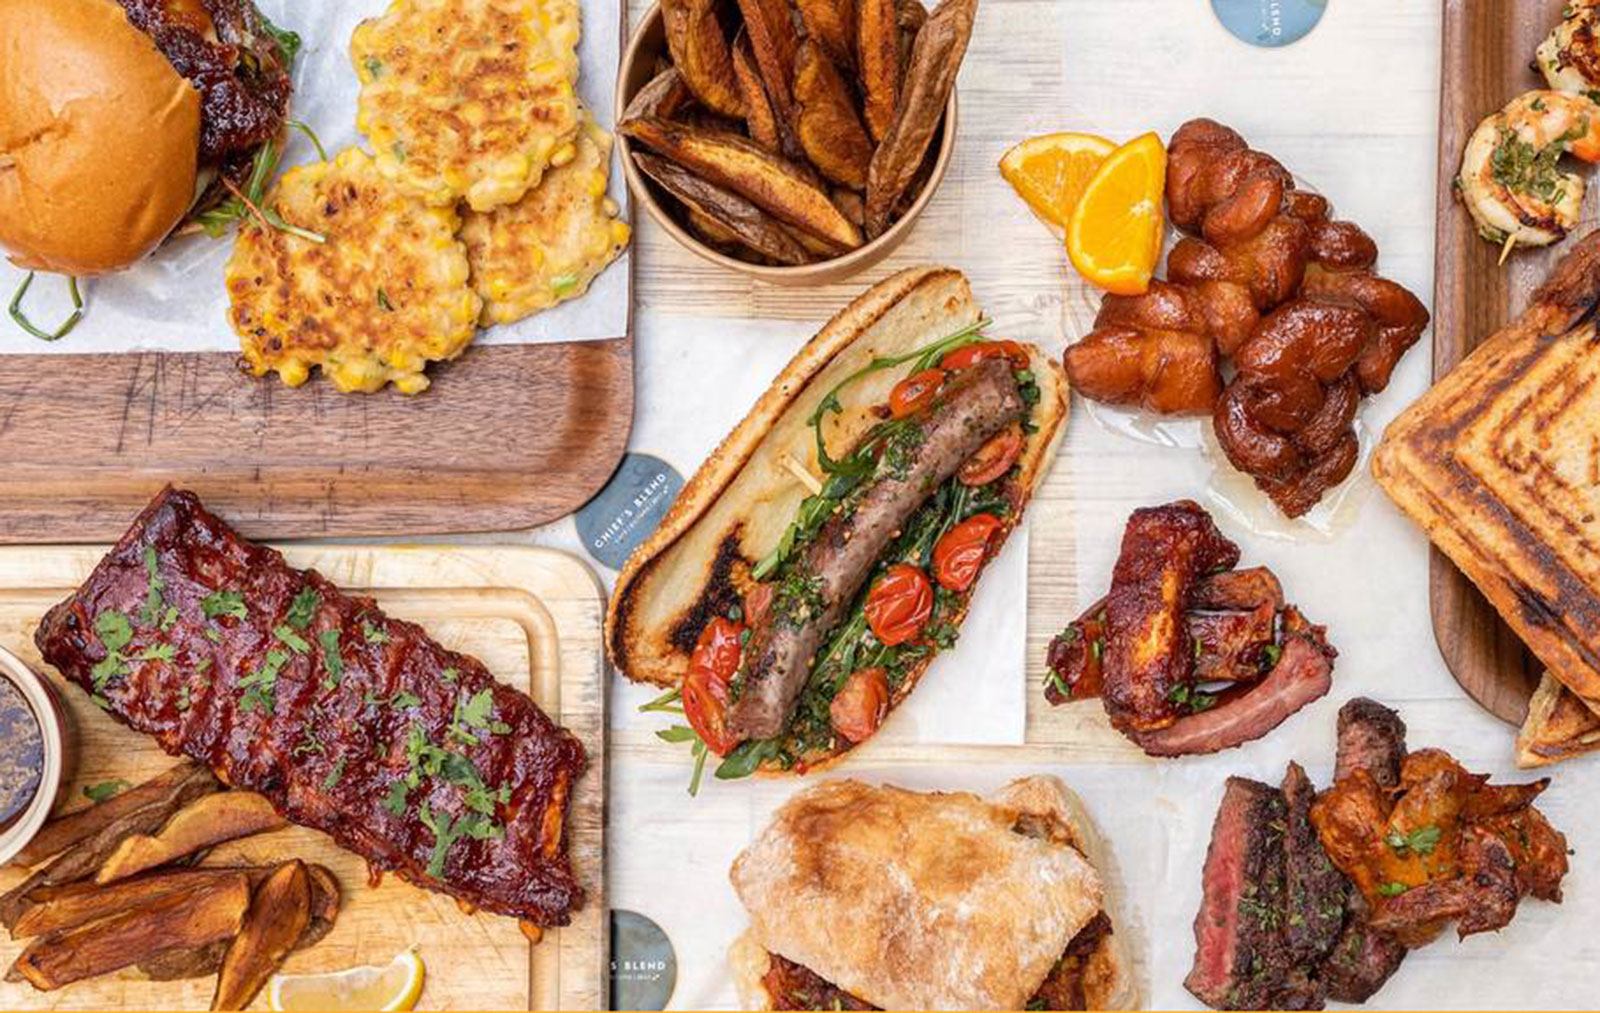 Get your fix of South African meats and snacks at Chief's Blend in Wan Chai